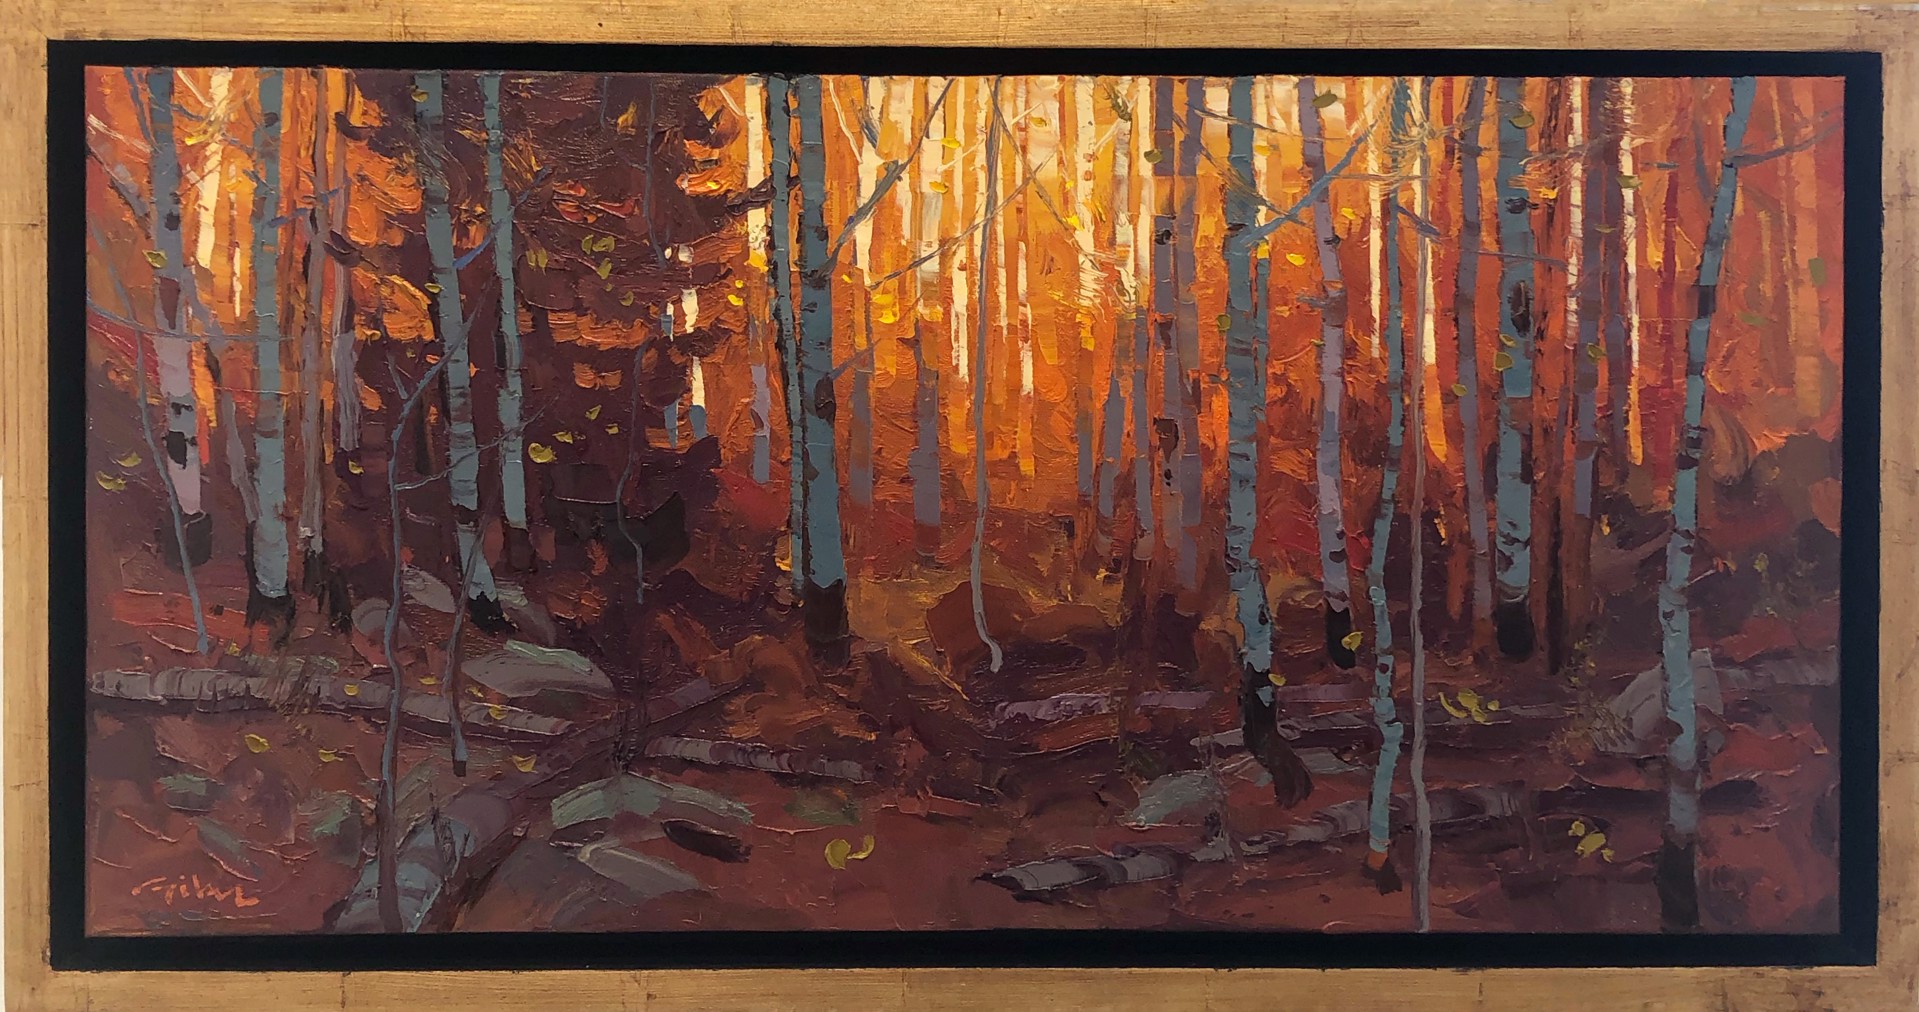 An Original Oil Painting Of The Sun Rising Glowing Red And Orange Through An Aspen Grove, By Silas Thompson Available At Gallery Wild